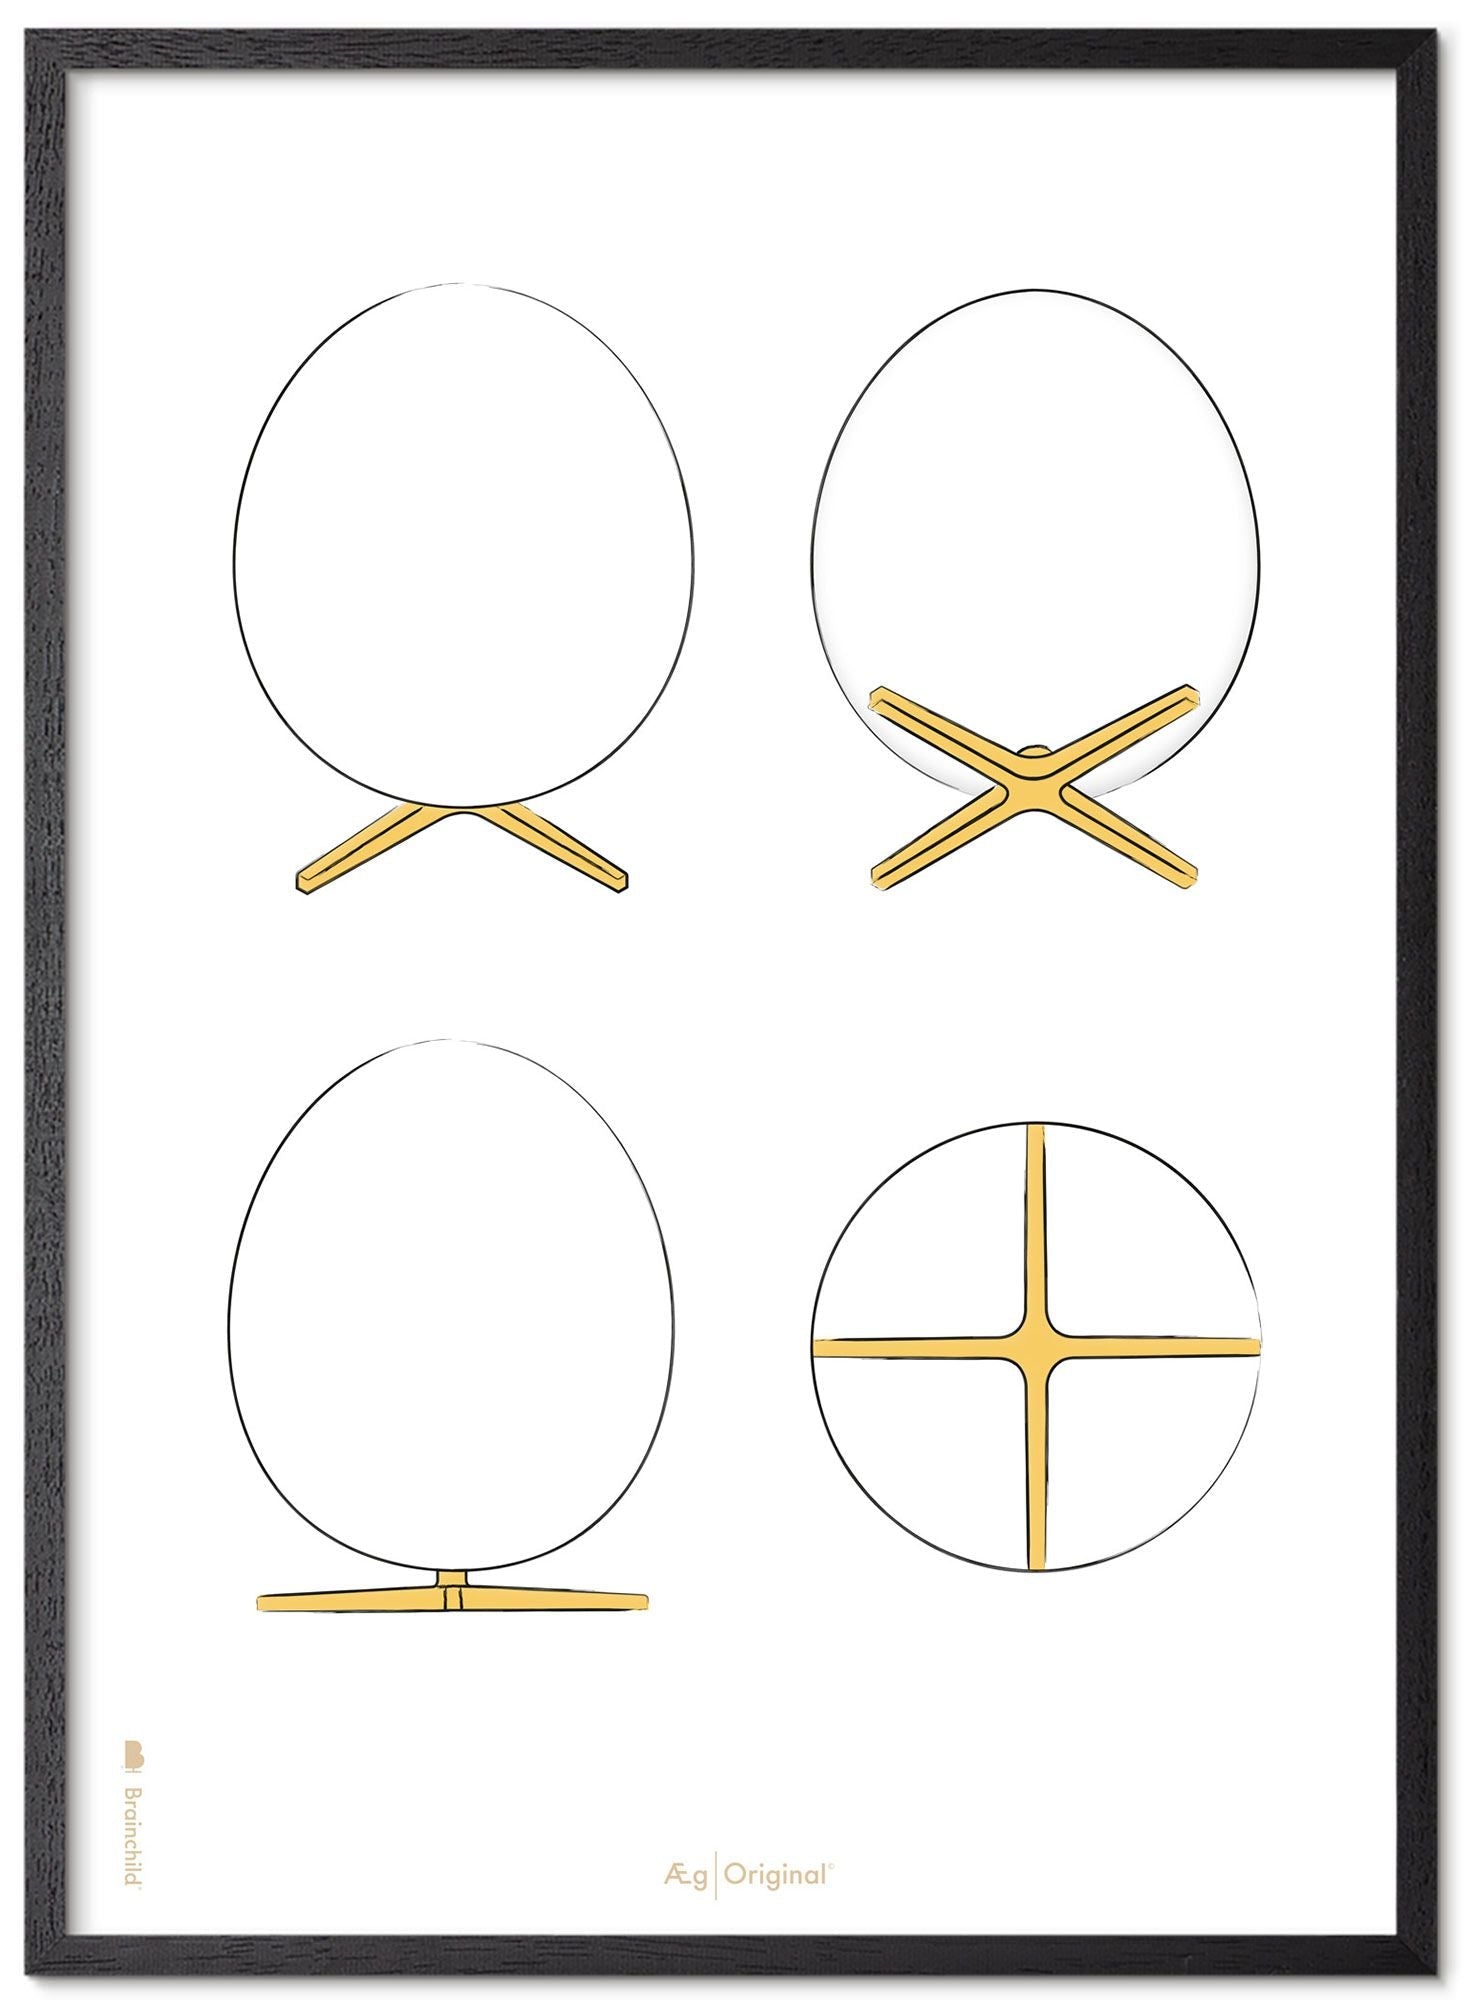 Brainchild The Egg Design Sketches Poster Frame Made Of Black Lacquered Wood A5, White Background